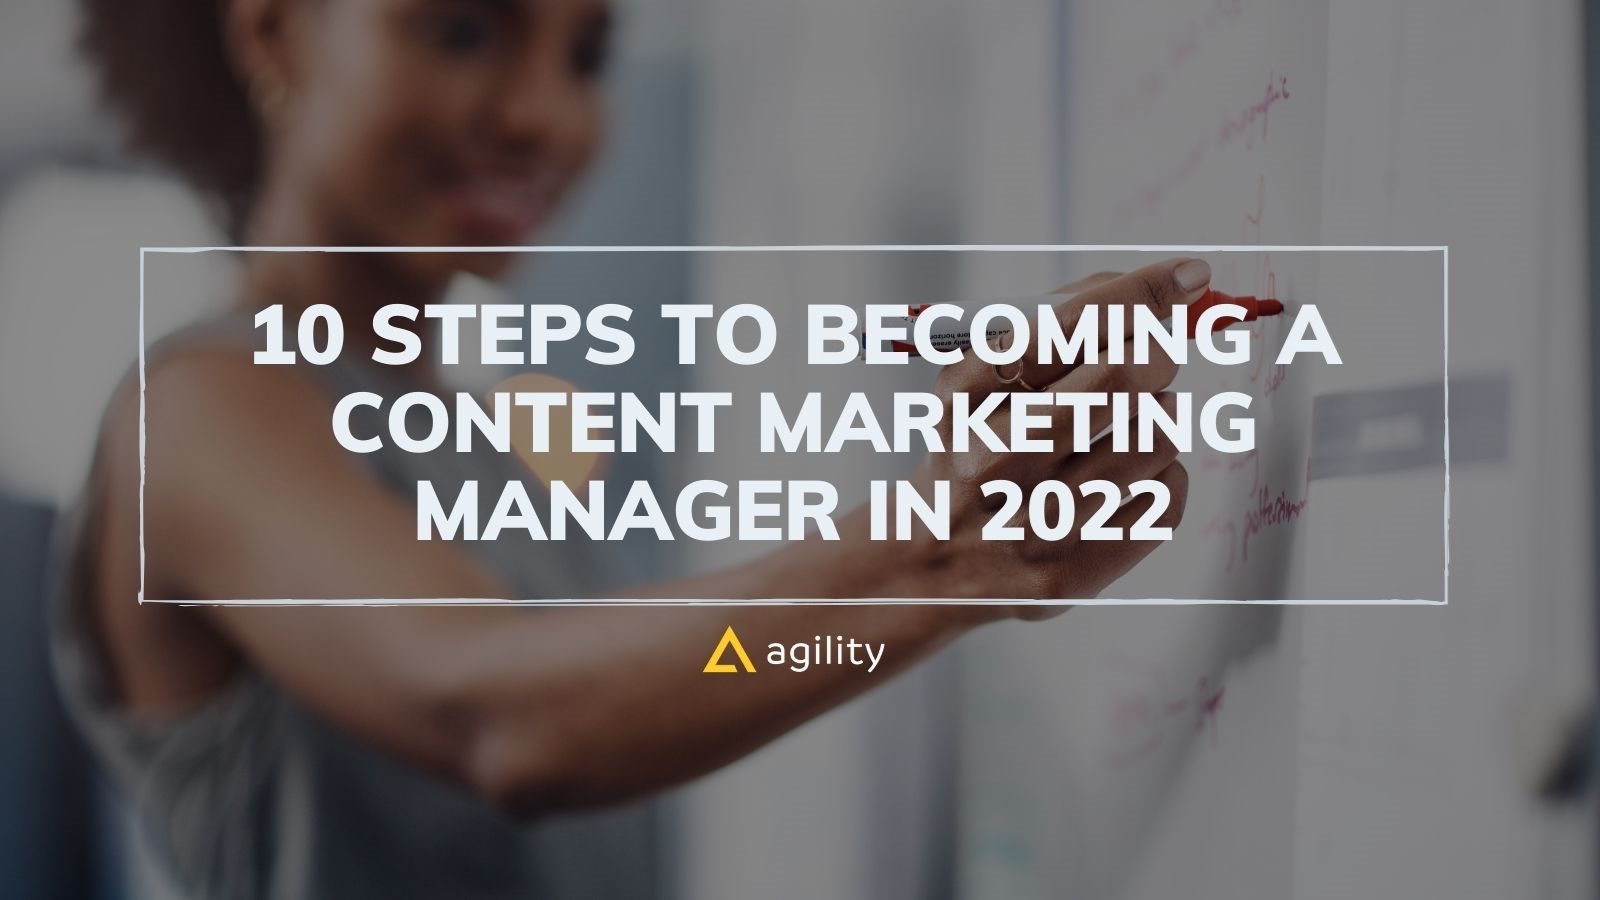 10 Steps to Becoming a Content Marketing Manager In 2022